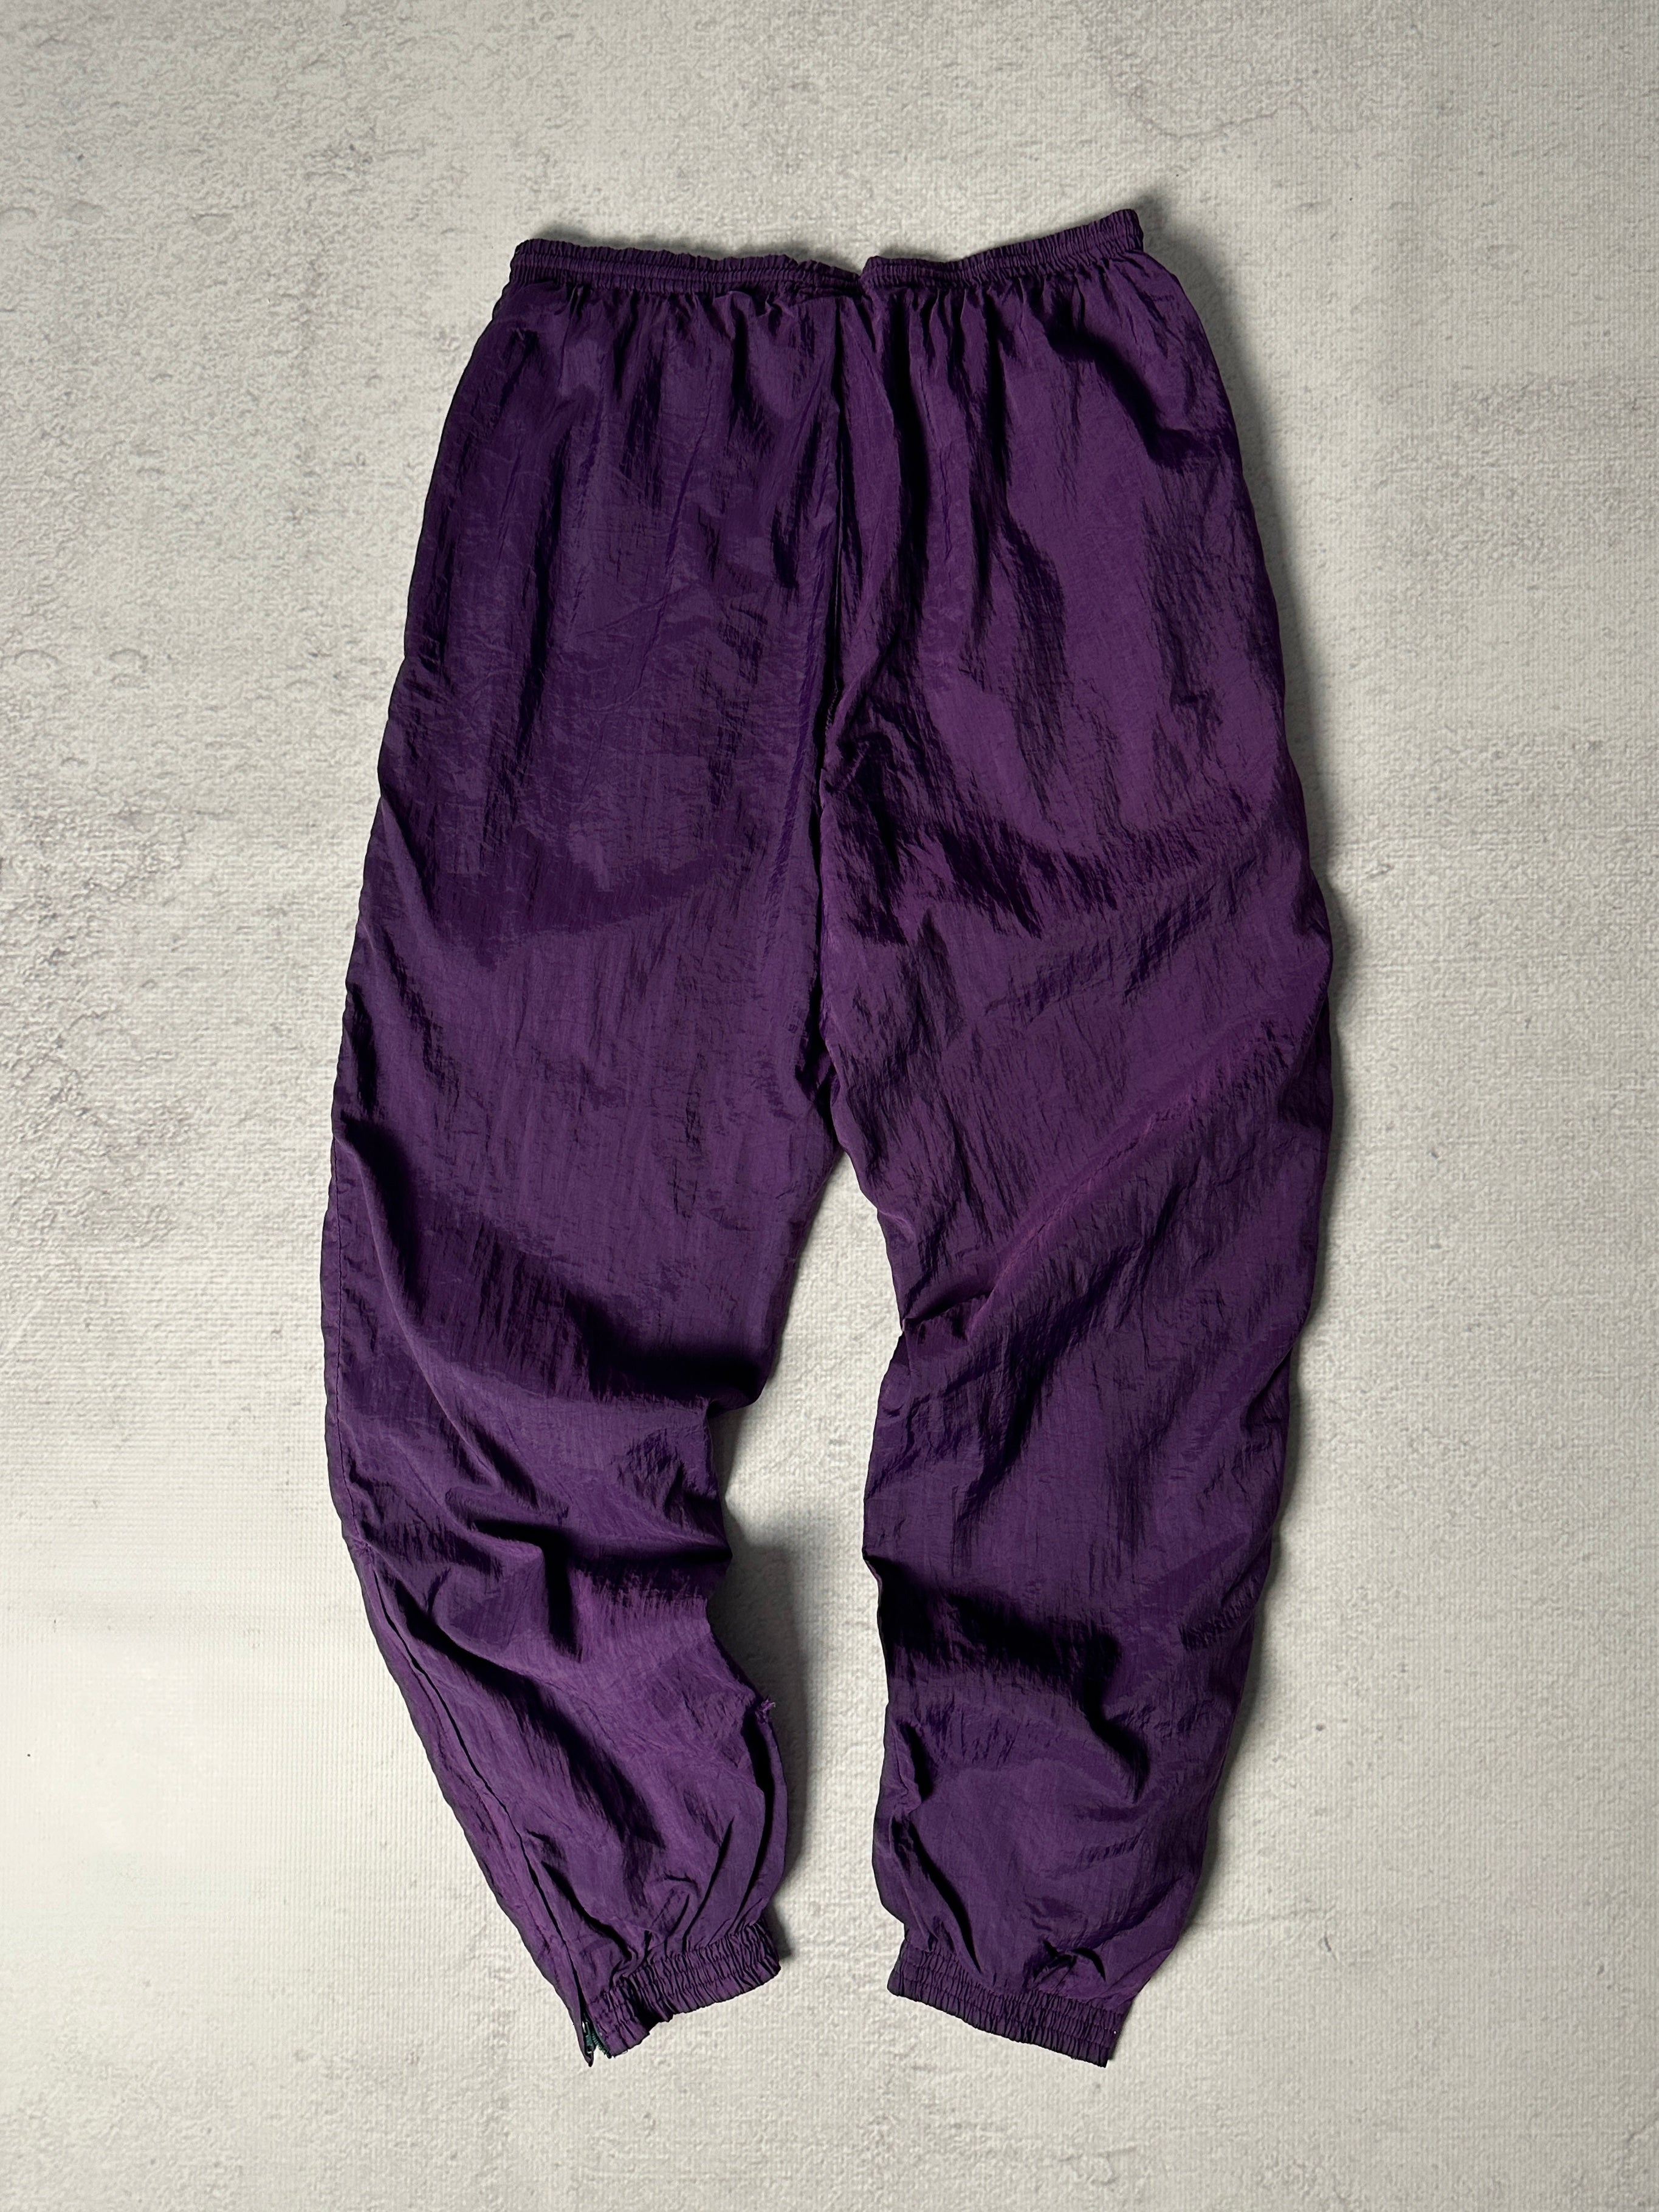 Vintage 90s Nike Cuffed Track Pants - Men's Small